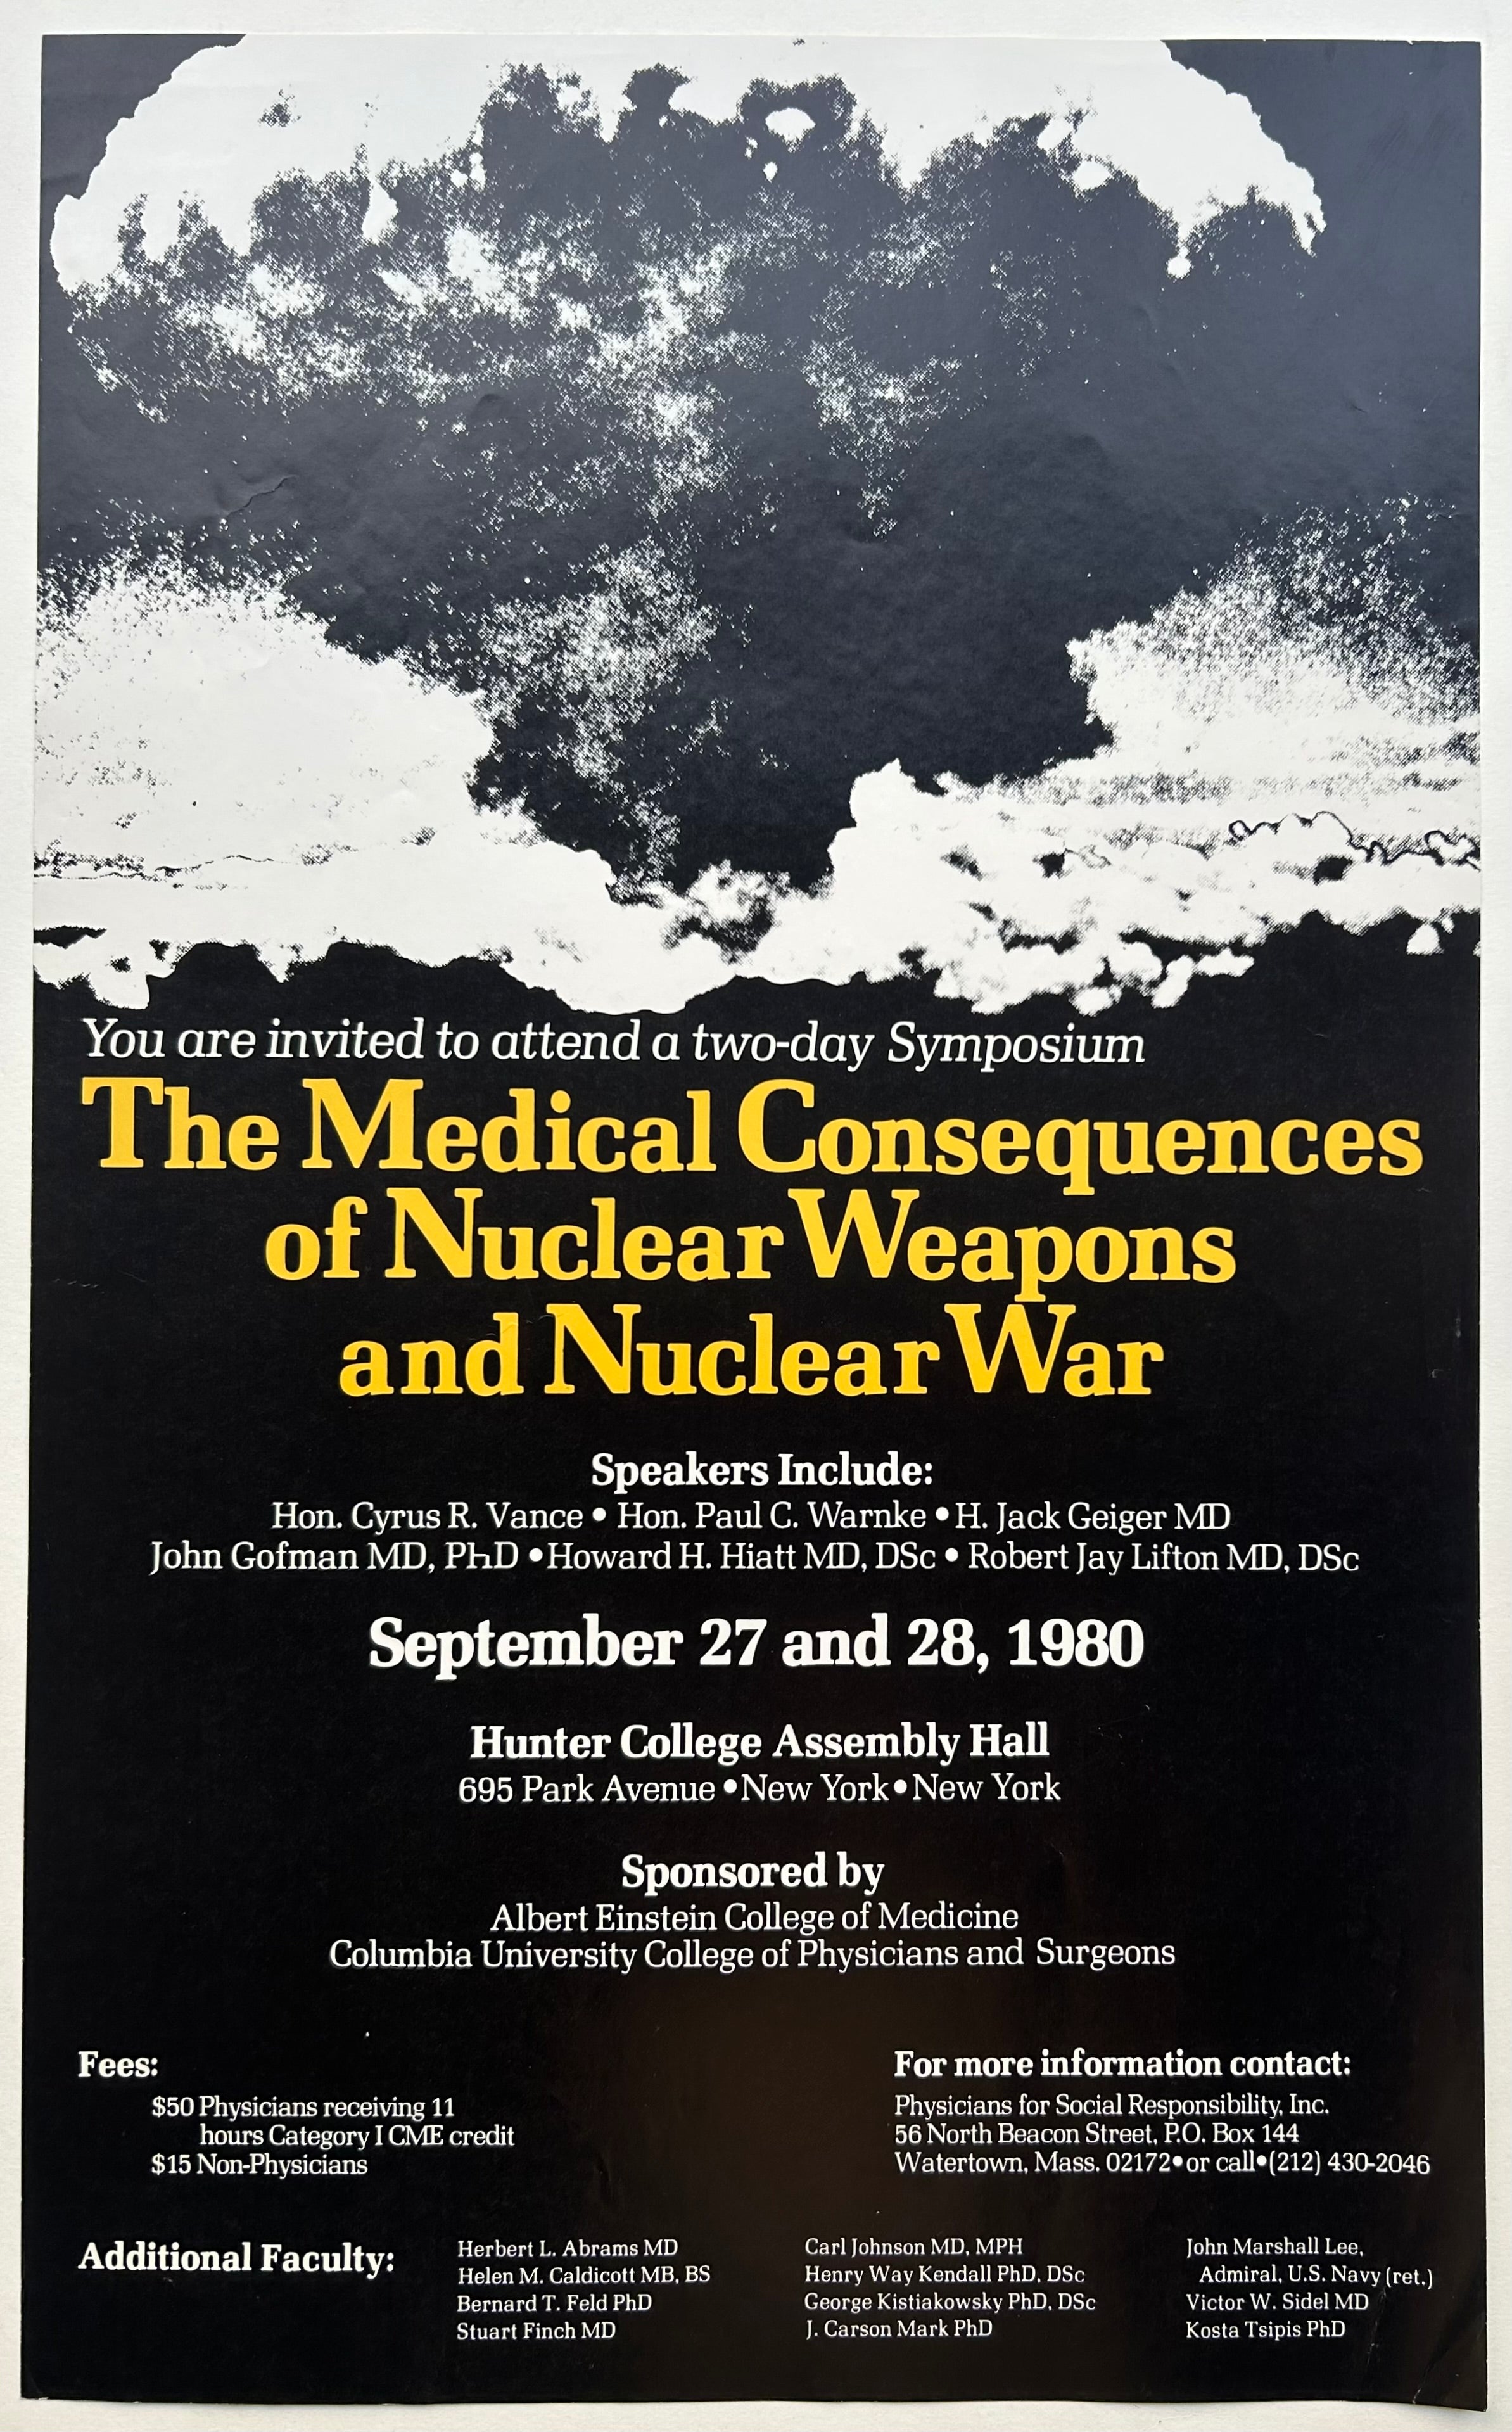 Black background with yellow text and white surrounding text. A nuclear mushroom is at the top. 